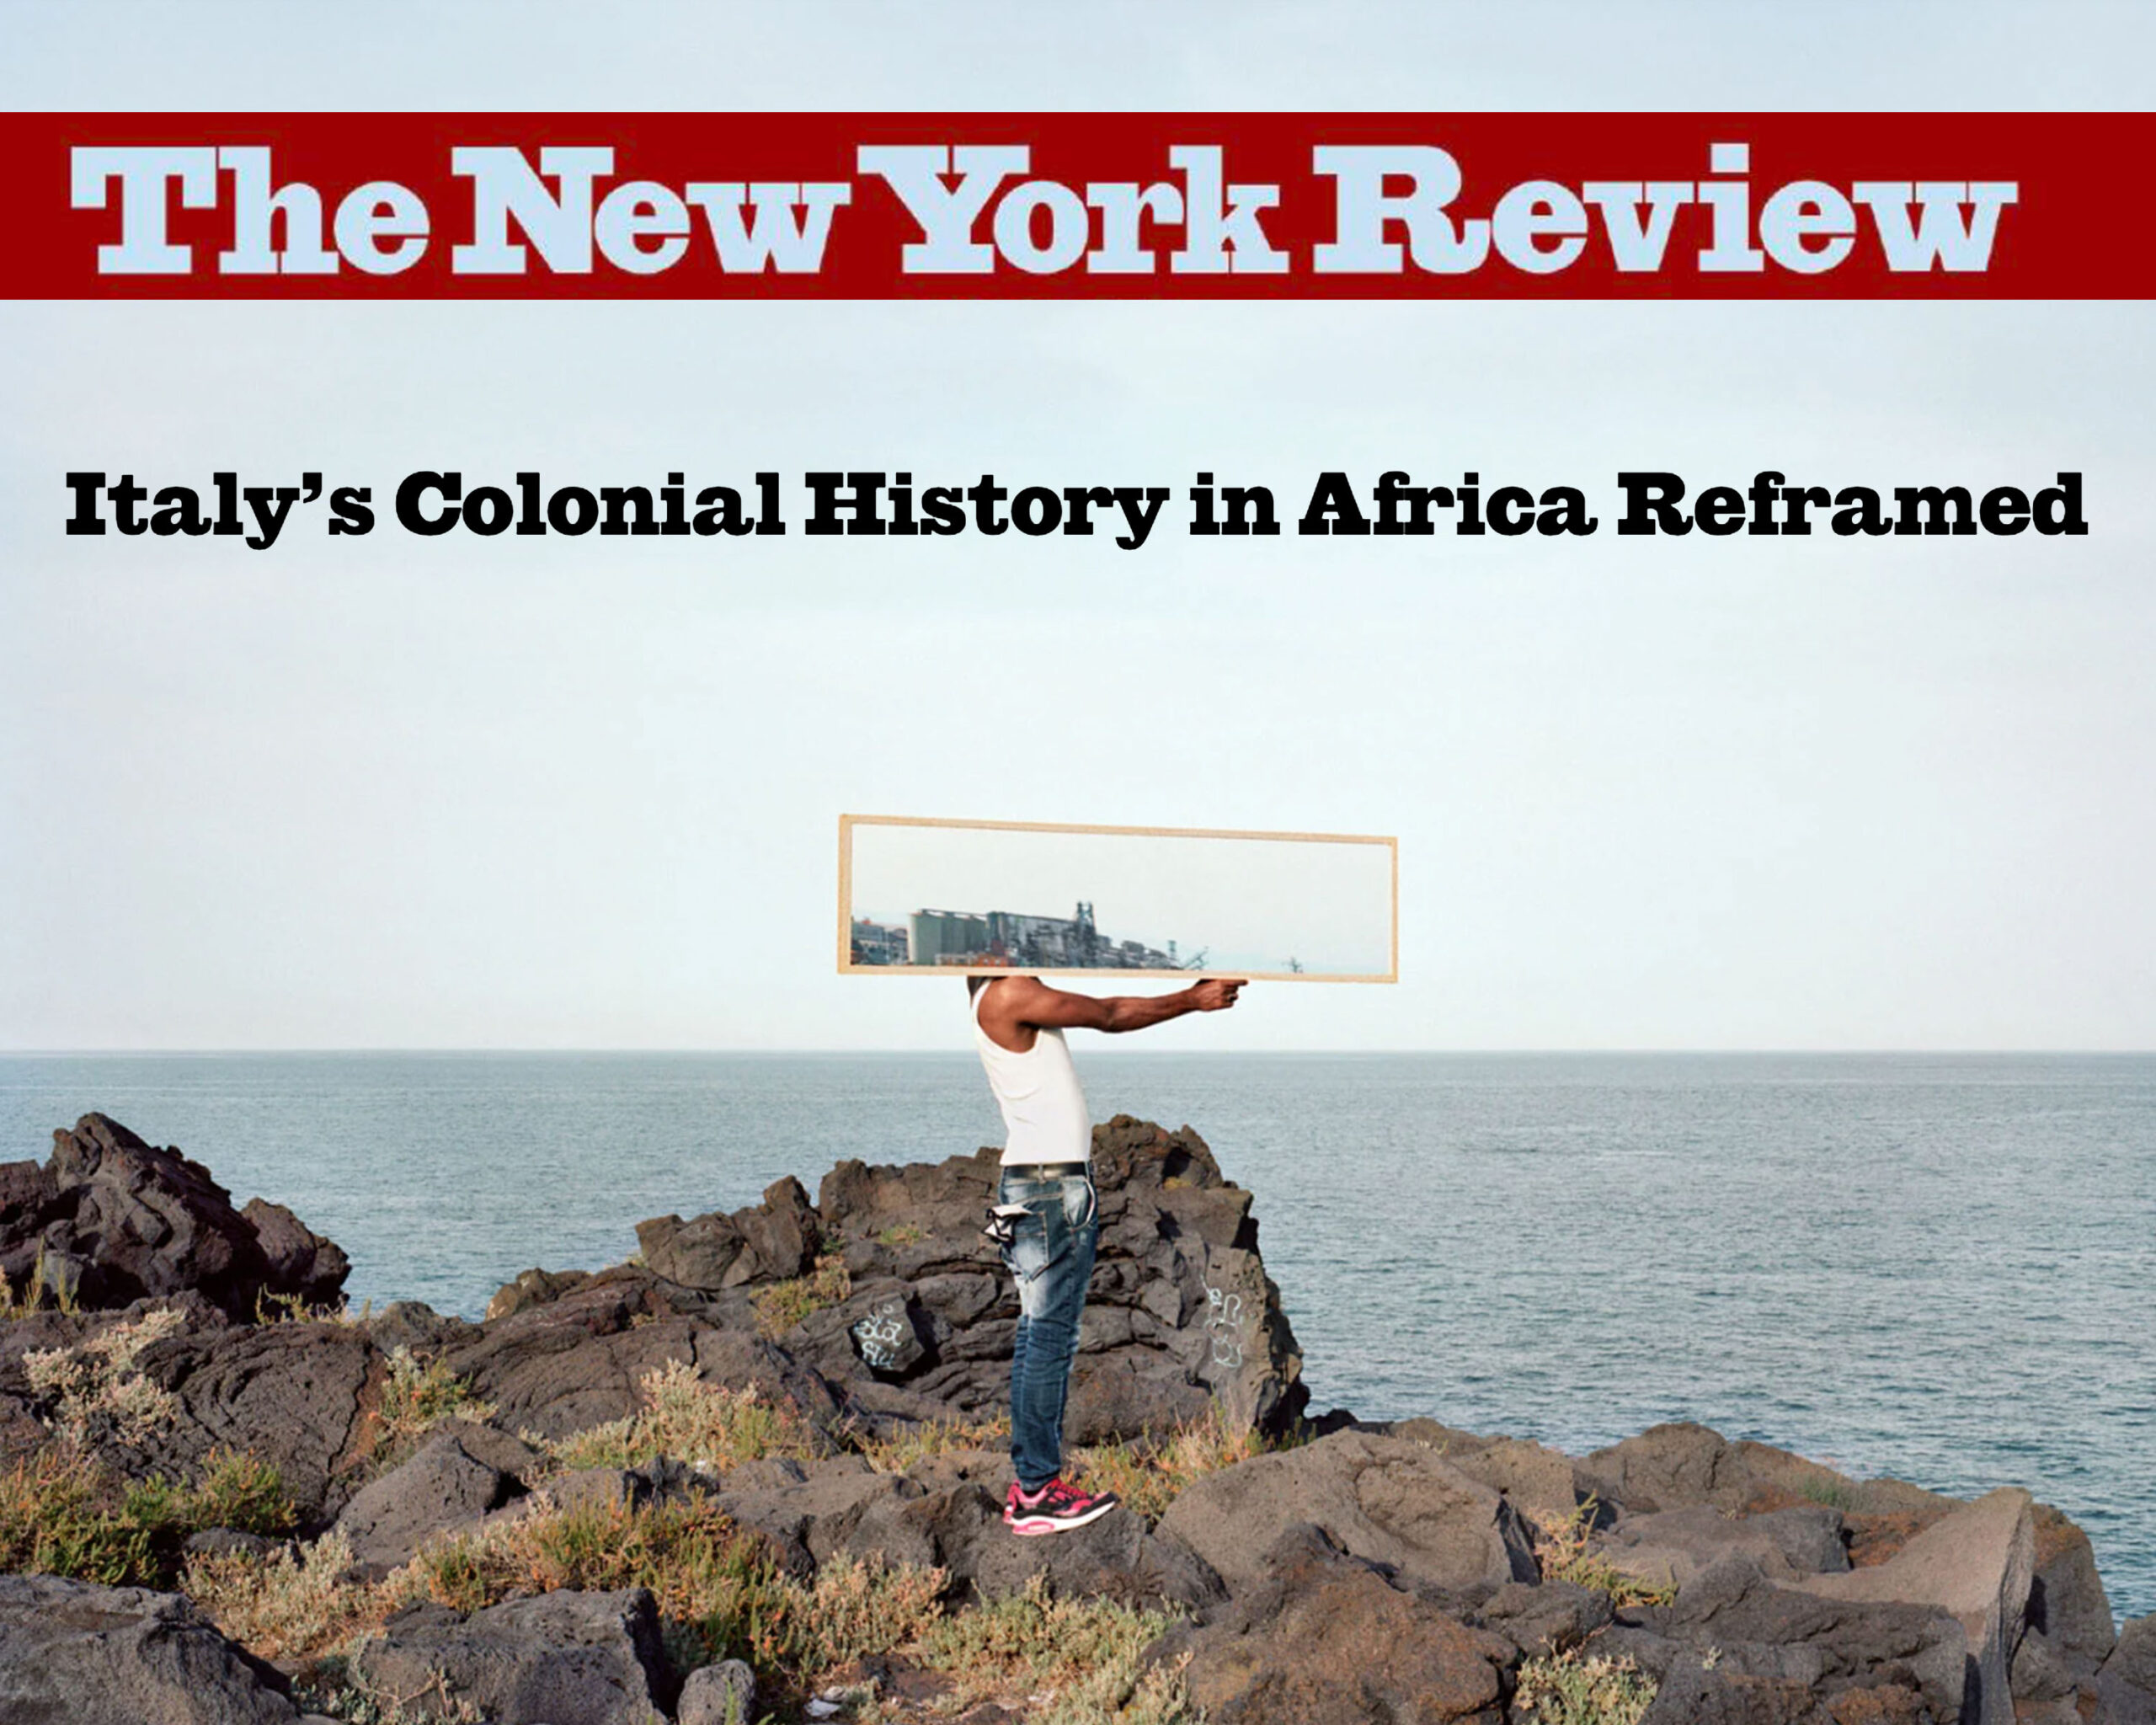 The New York Review, 2020 | Italy’s Colonial History in Africa Reframed